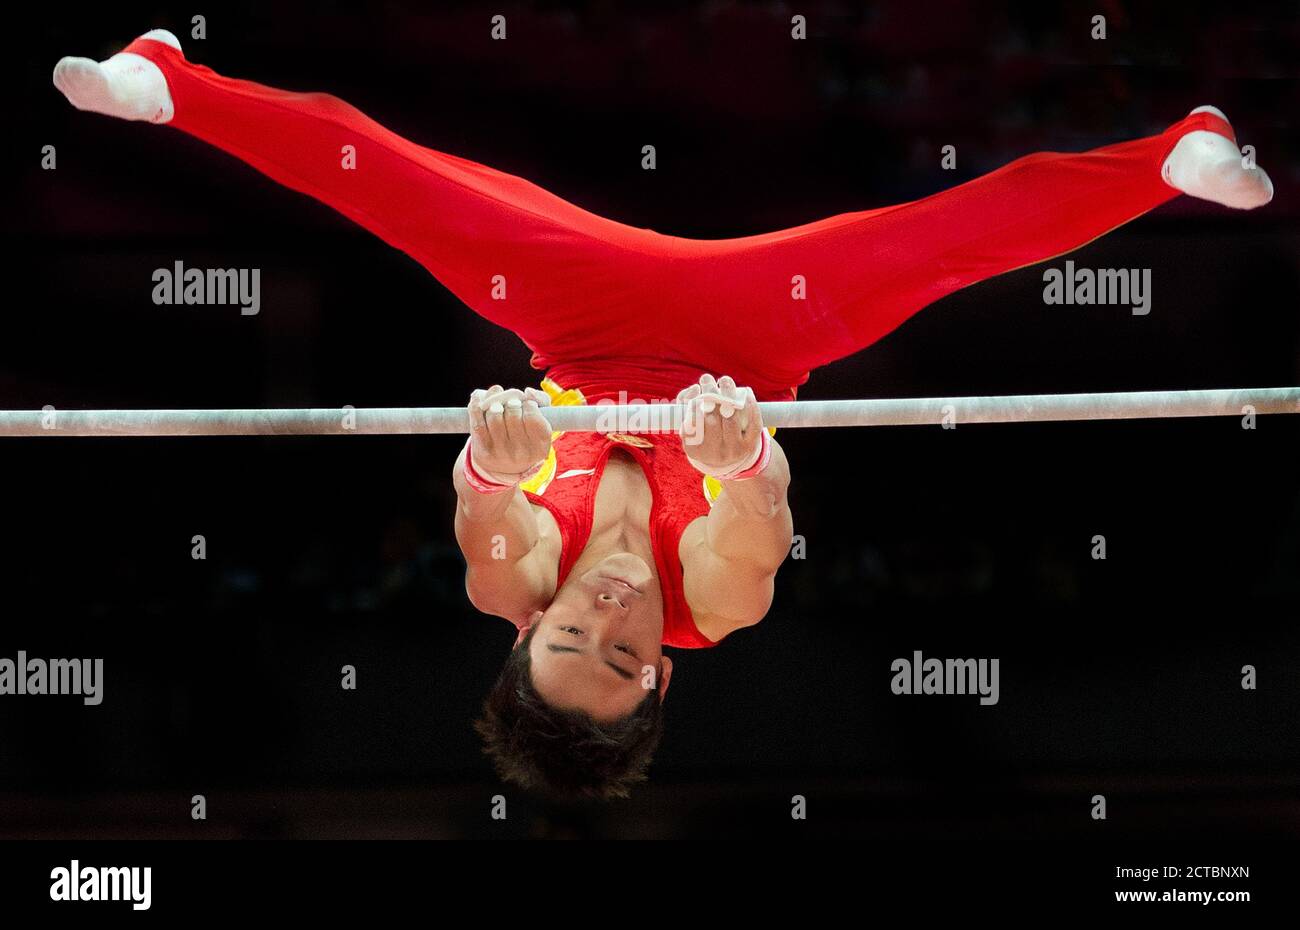 MENS HORIZONTAL BAR FINAL  LONDON 2012 OLYMPICS NORTH GREENWICH ARENA  Copyright Picture : Mark Pain / Alamy Stock Photo